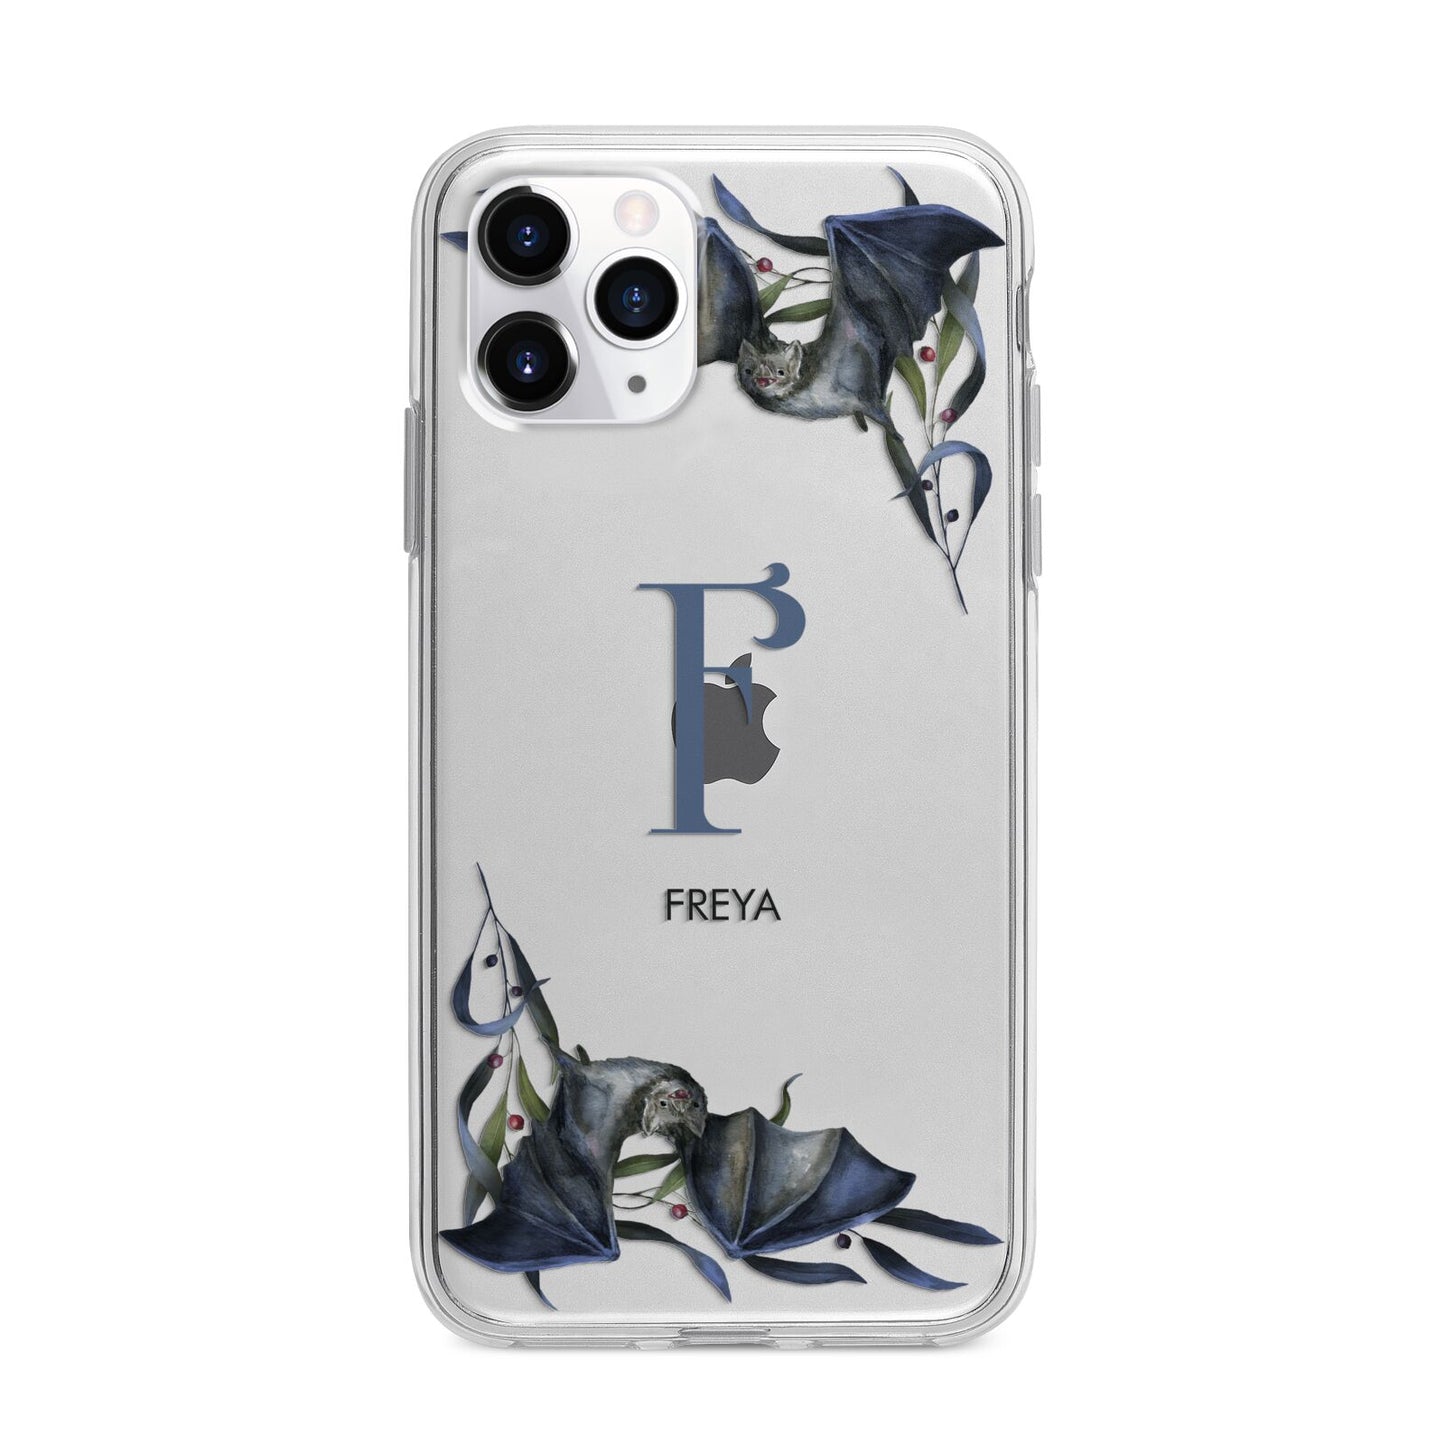 Monogram Bats Apple iPhone 11 Pro Max in Silver with Bumper Case